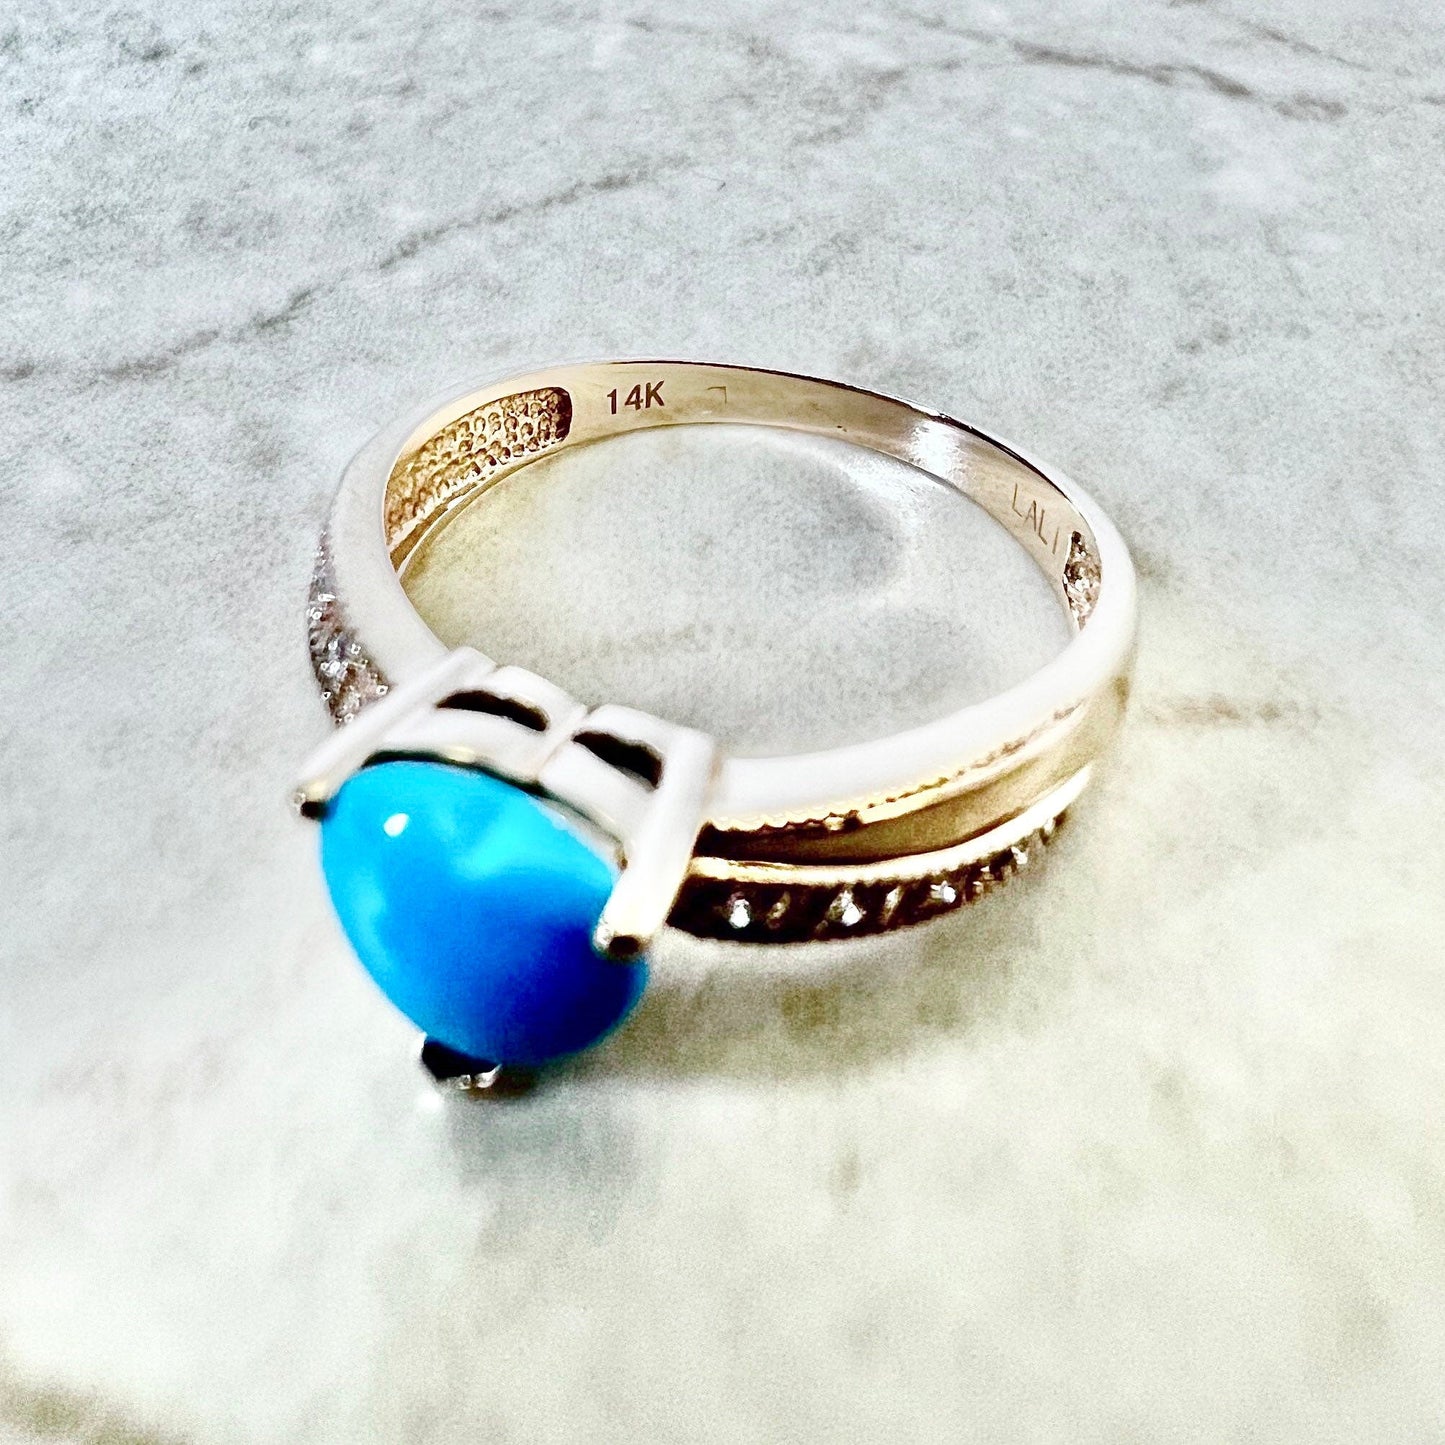 14K Gold Turquoise & Diamond Heart Cocktail Ring - Rose Gold Turquoise Ring - Gold Turquoise Solitaire Ring - Valentine’s Day Gifts For Her